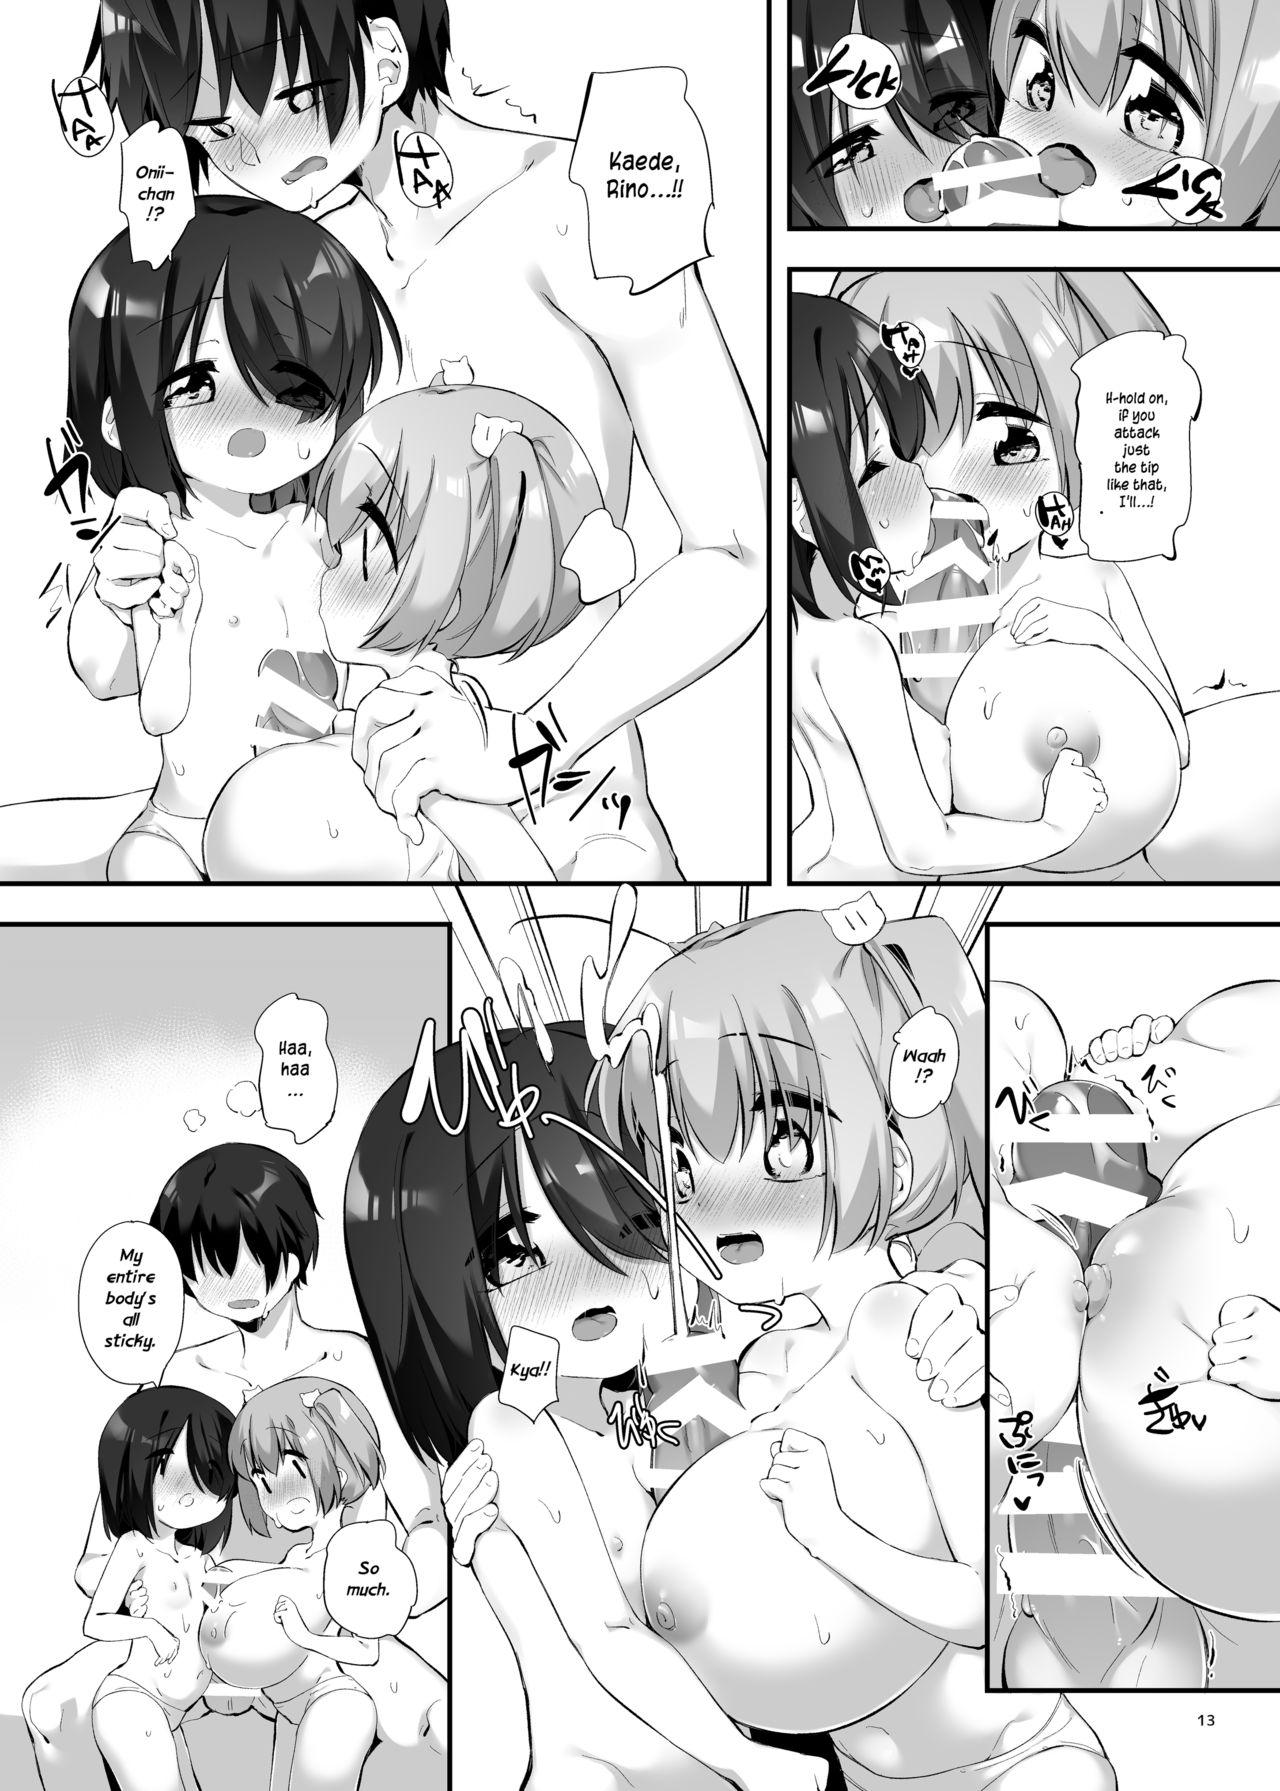 Pissing Imouto ni Hasamarete Shiawase Desho? 3 | Between Sisters, Are You Happy? 3 - Original Squirt - Page 12